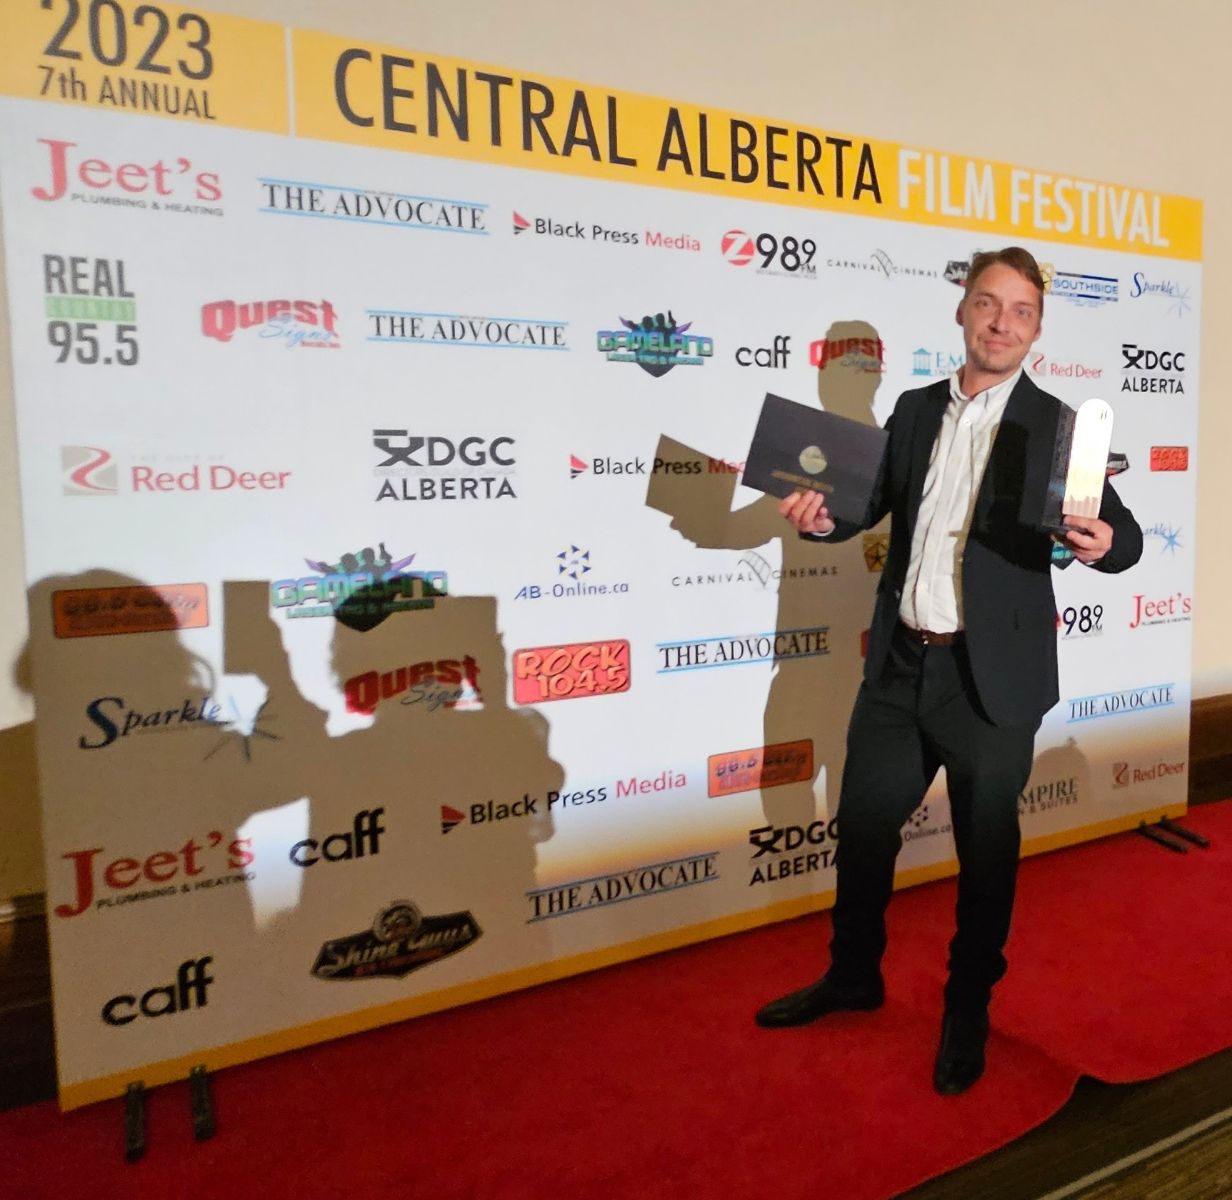 Mike Shoreman standing in front of a Central Alberta Film Festival sign holding an award and a large black envelope.